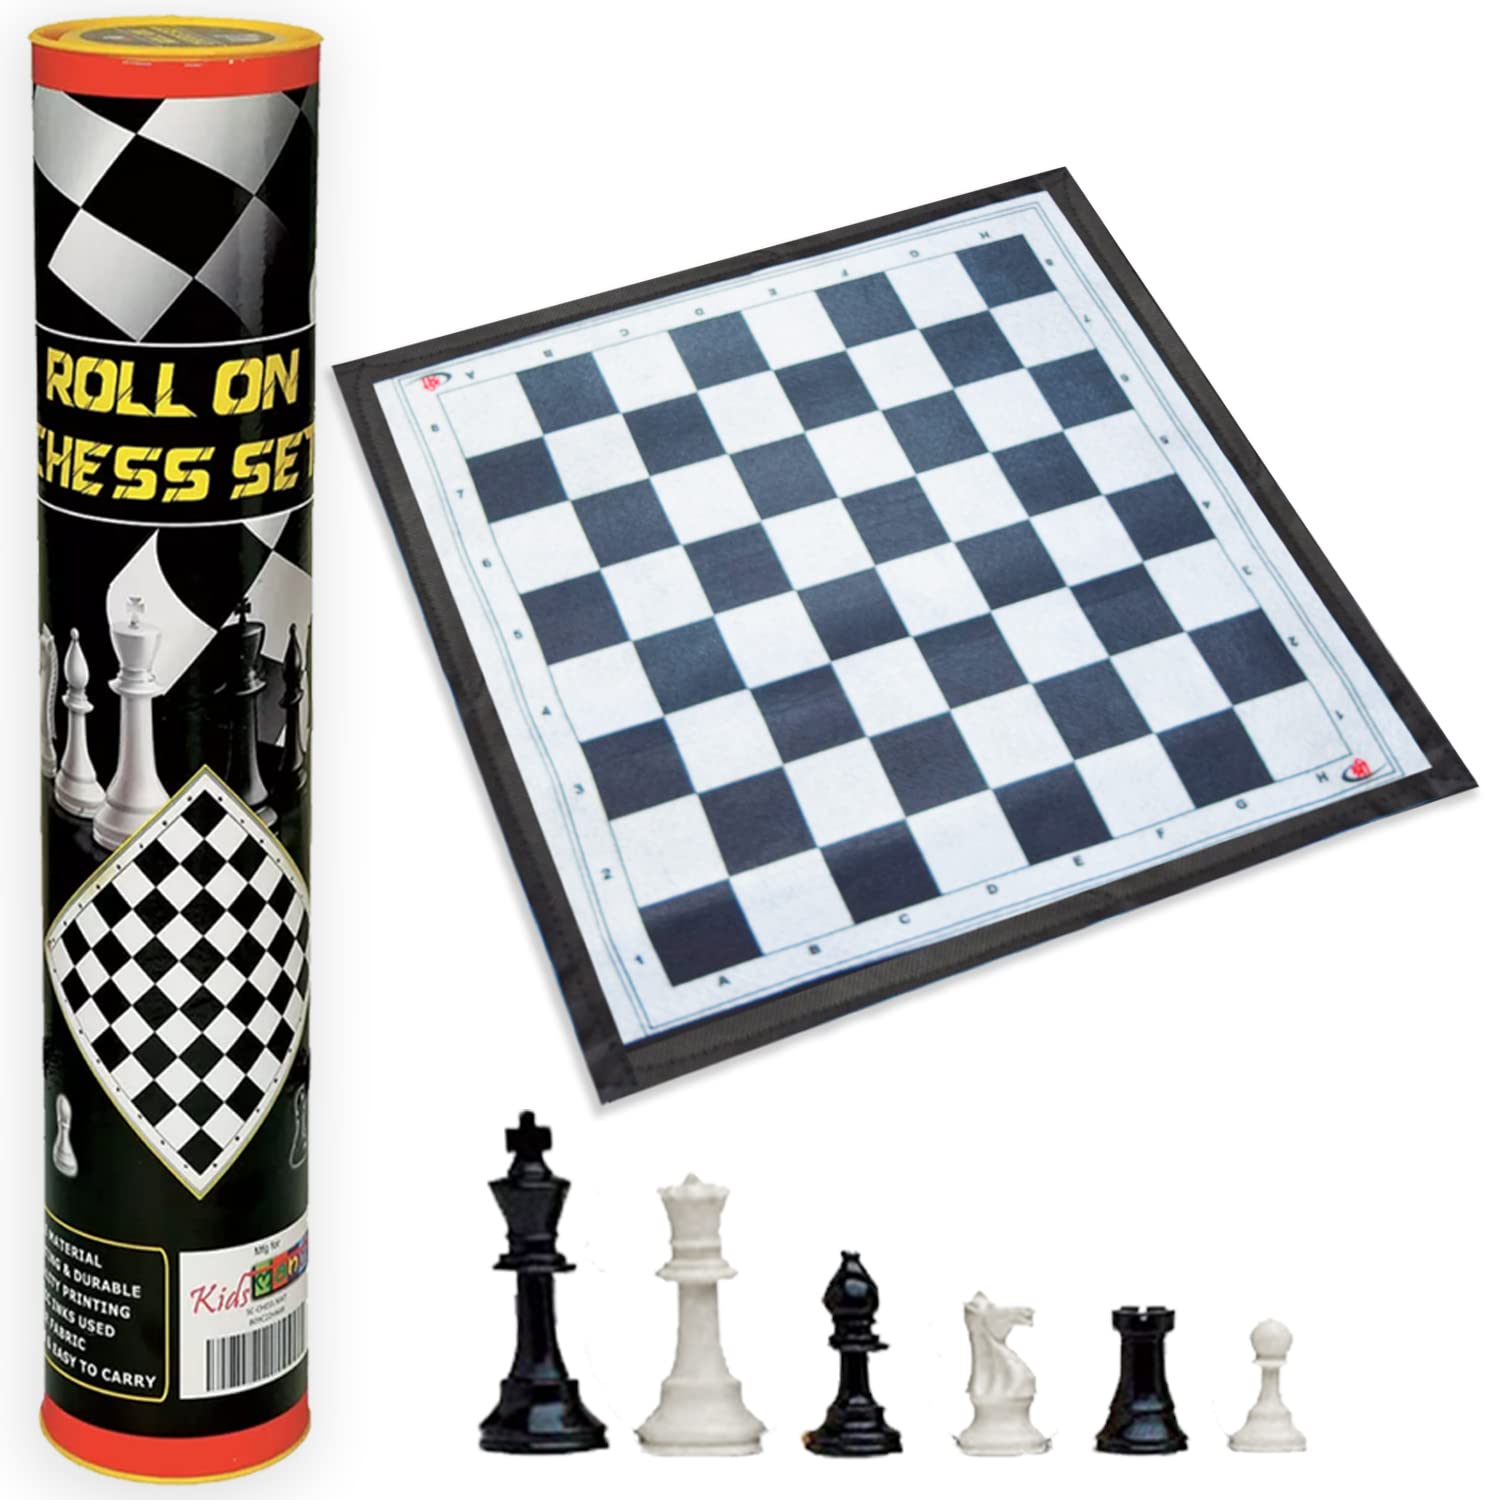 Kids Mandi travel chess set in multicolor - lightweight and portable